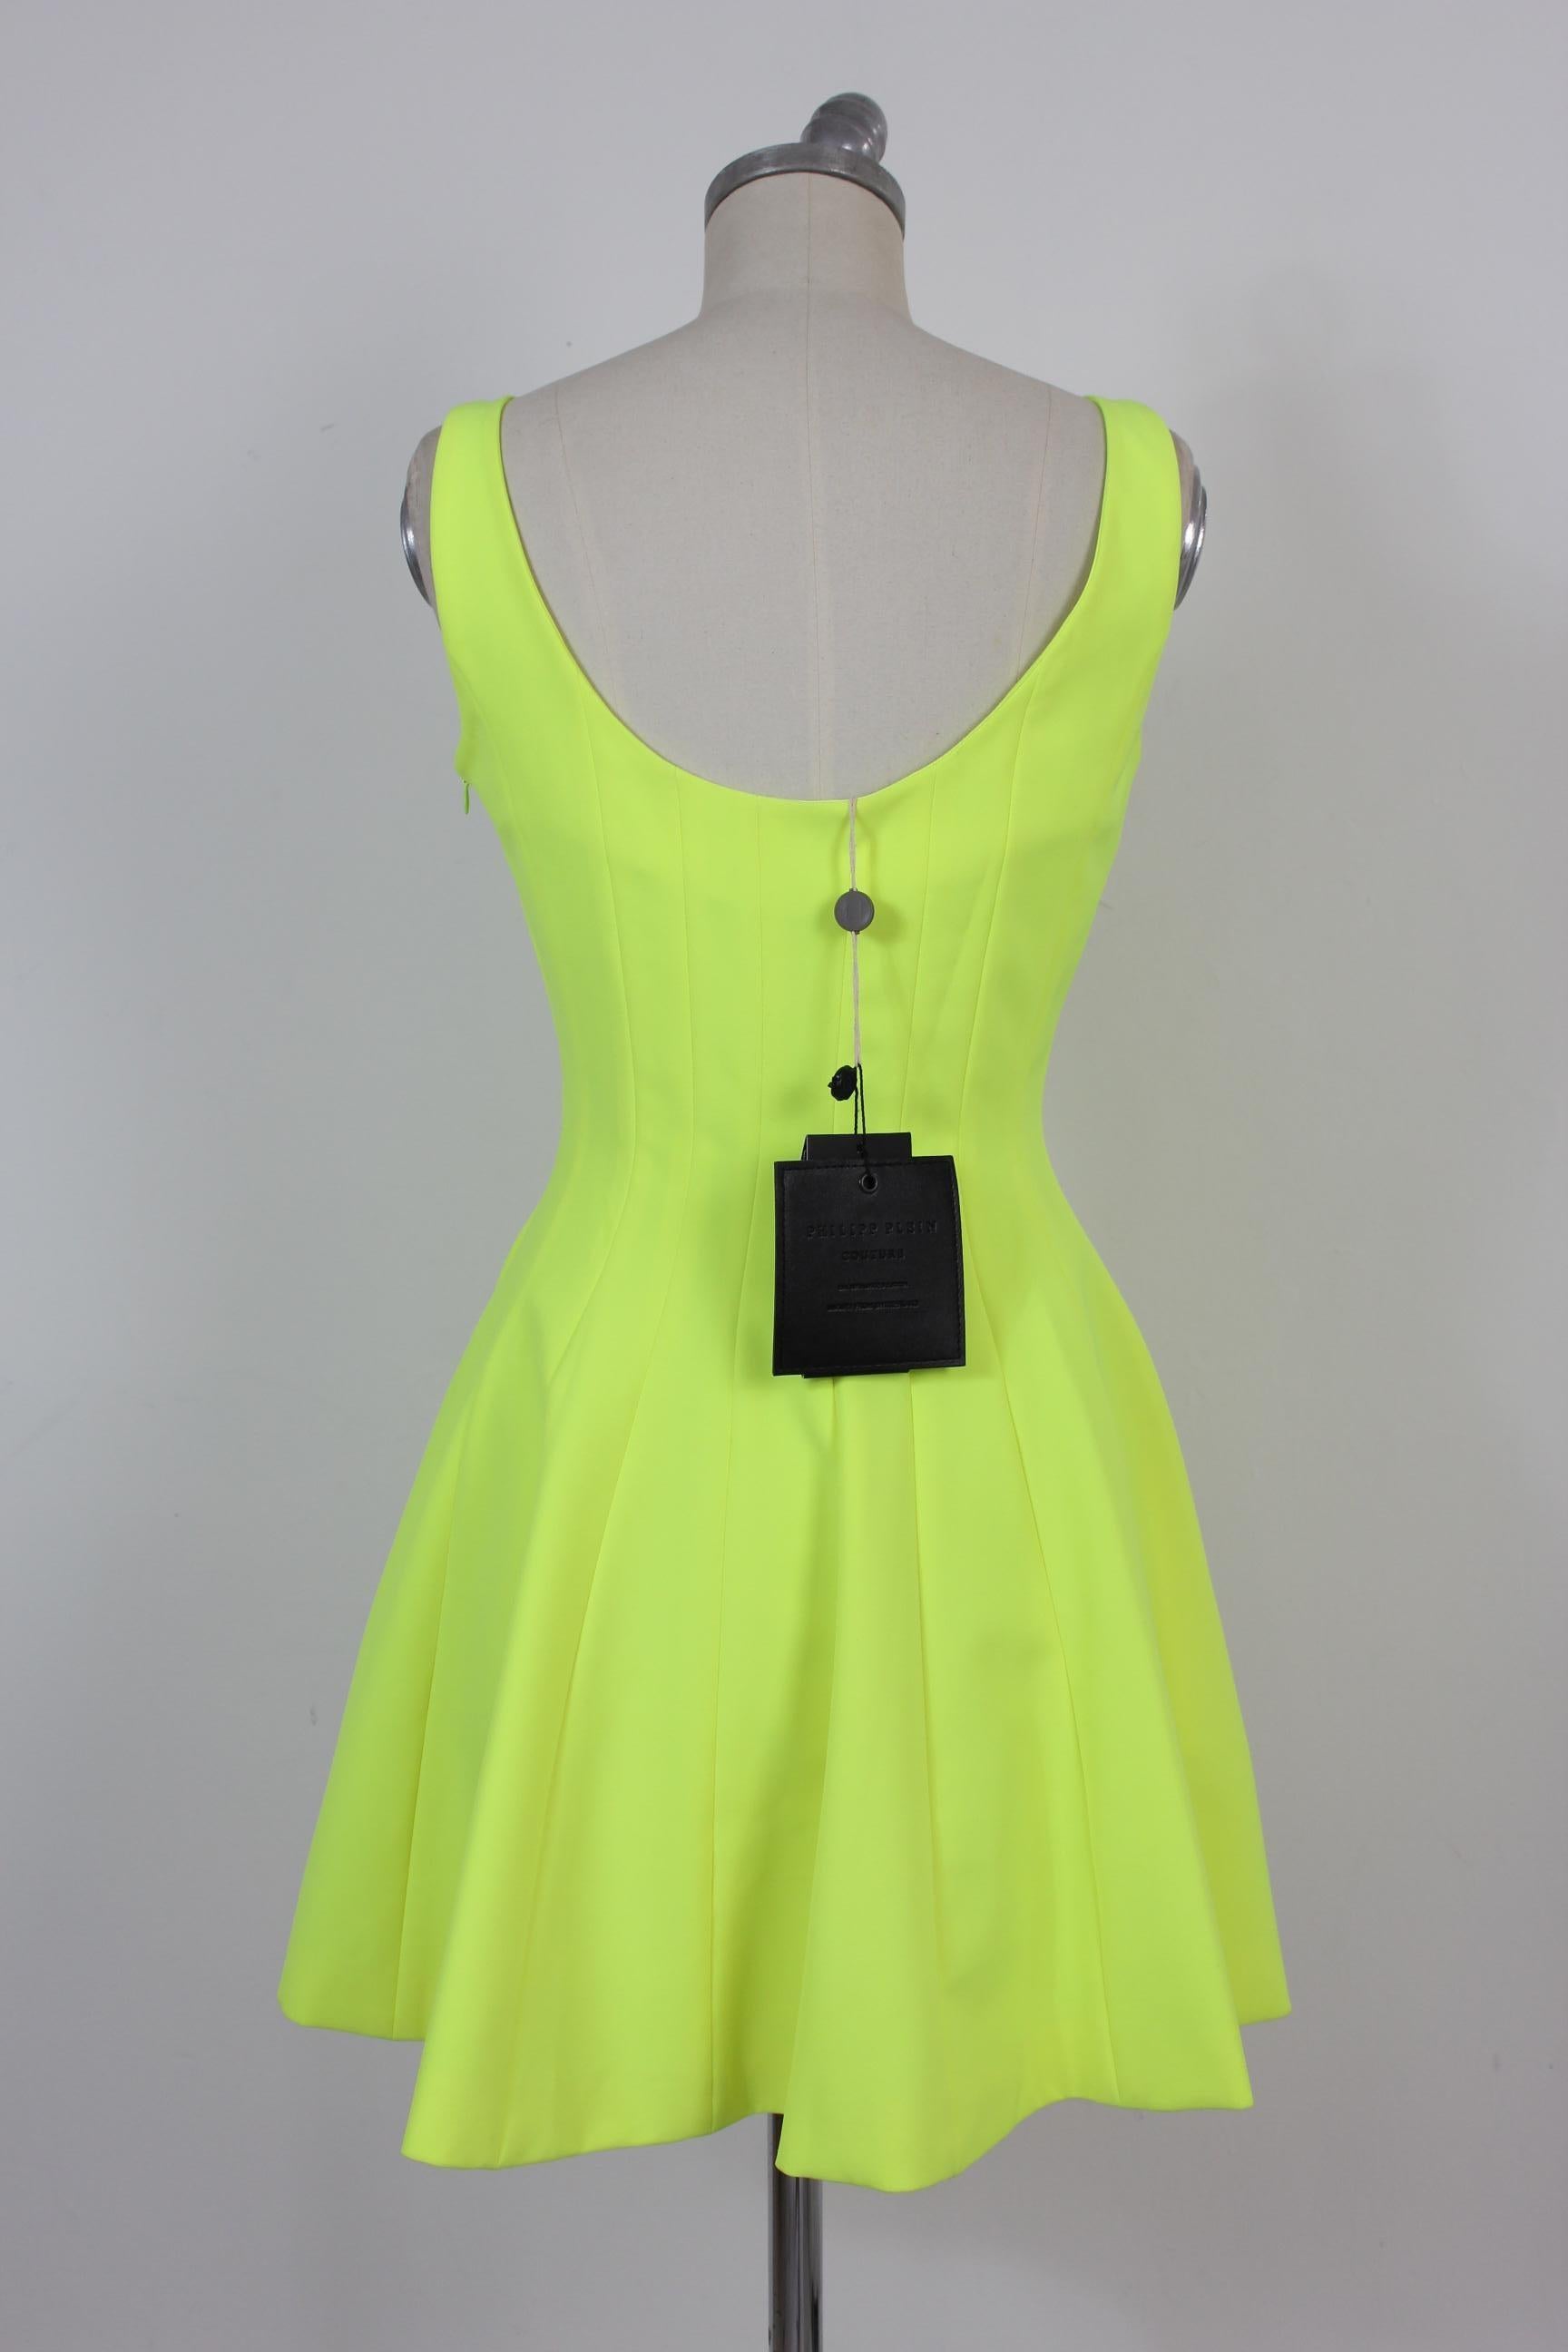 Philipp Plein Couture women's dress 2000s. Elegant dress embellished with colored stones on the decollete. Wide neckline on the back. Flared skirt. Fluo yellow color. 96% polyester 4% elastene. Lined interior 100% nylon. Made in Italy. New with tag,